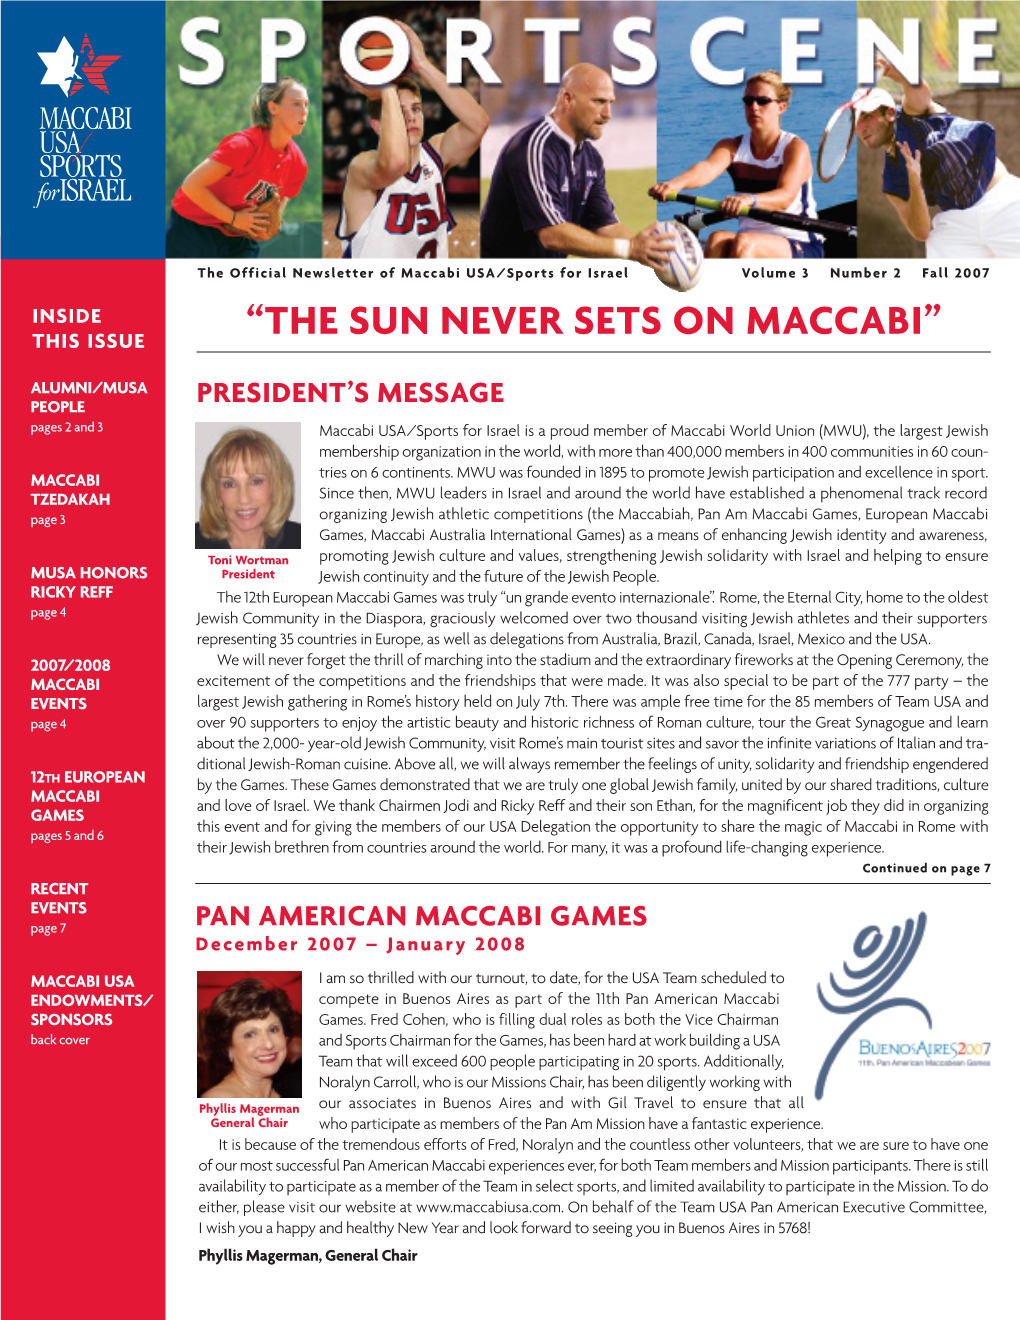 “The Sun Never Sets on Maccabi” This Issue